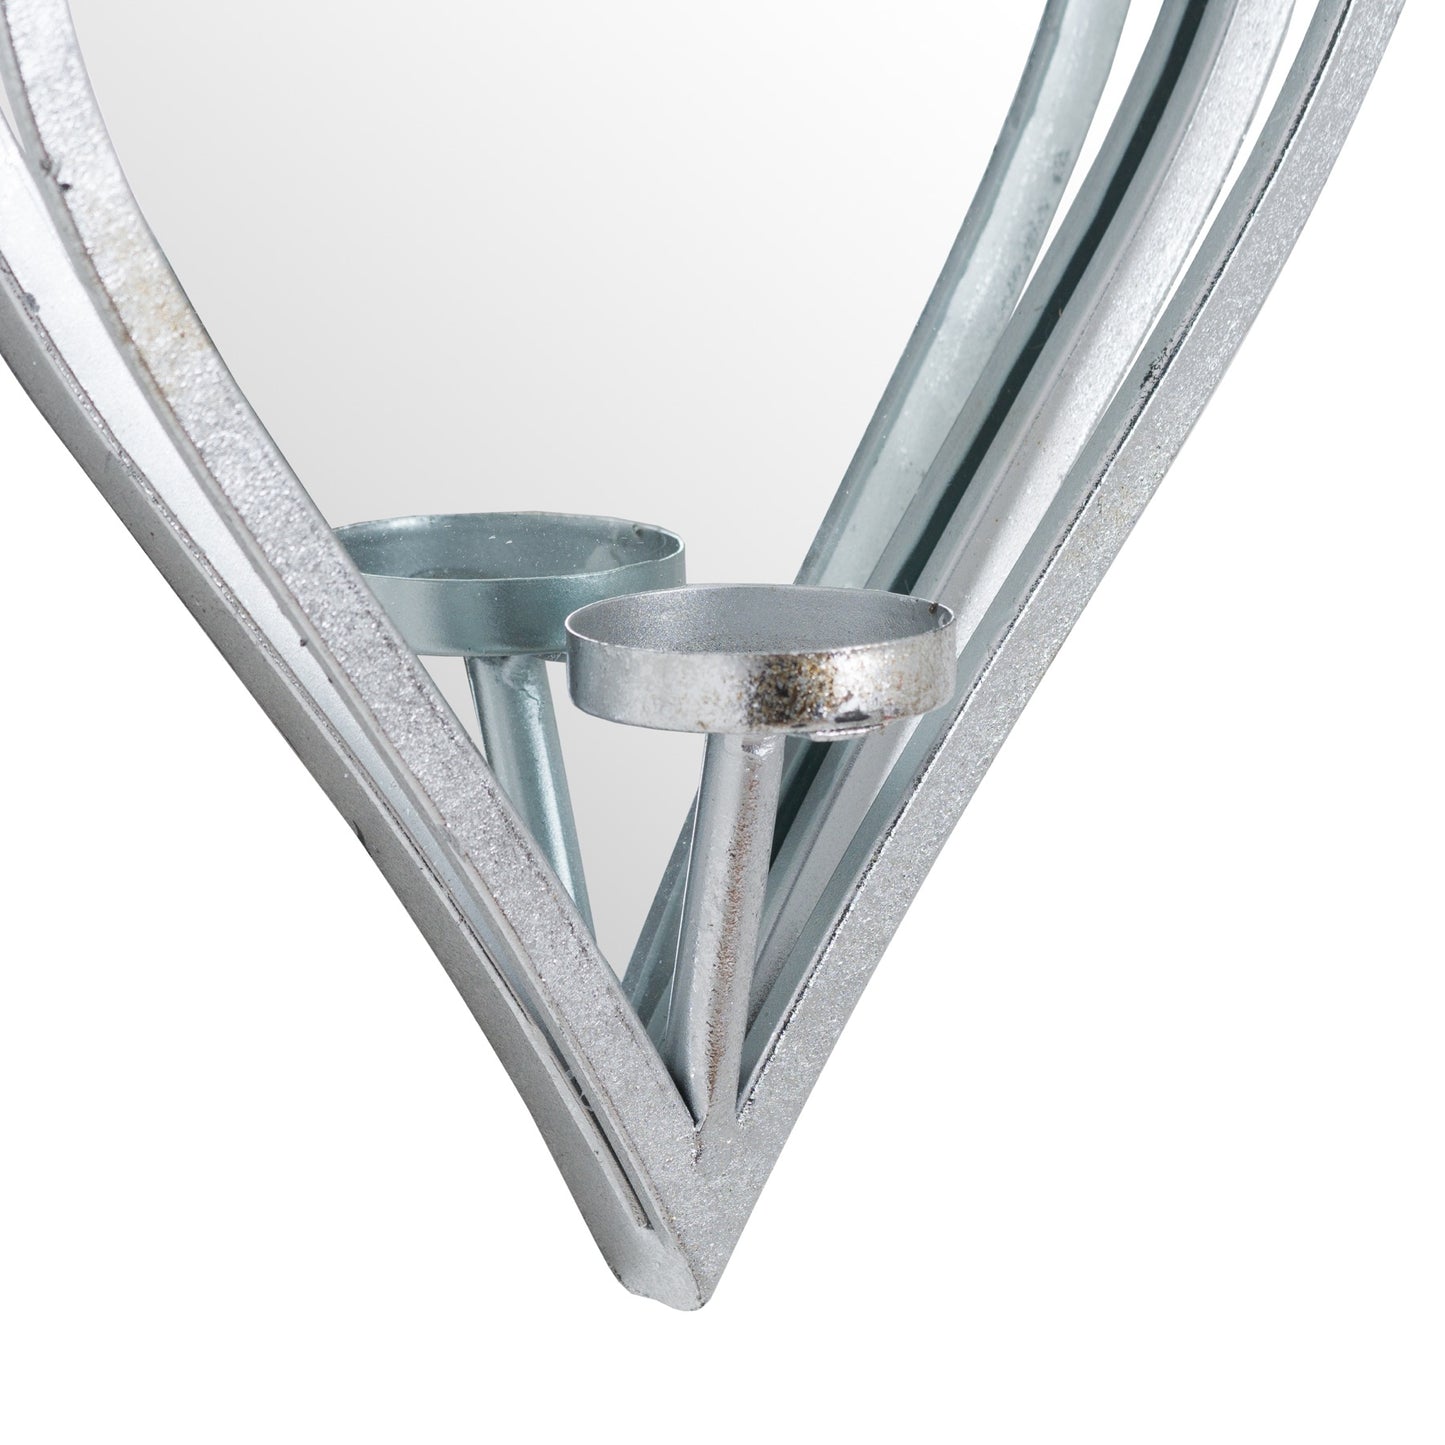 Small Silver Mirrored Heart Candle Holder